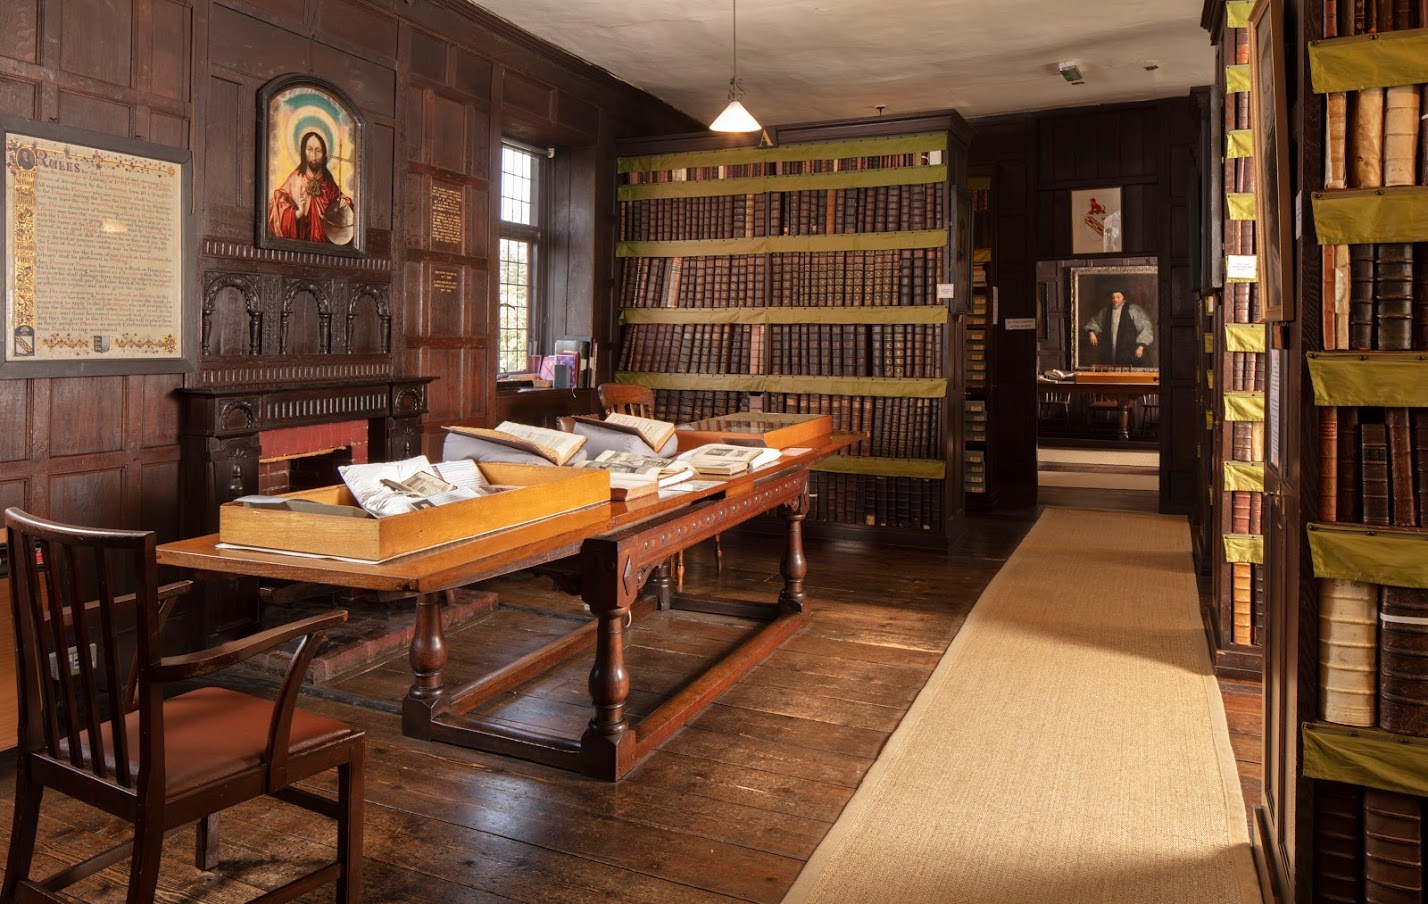 The library room shows dark wood panelling, wooden floorboard and dark wood bookcases with a long table to the left, covered in historic books. Historic portraits line the walls.